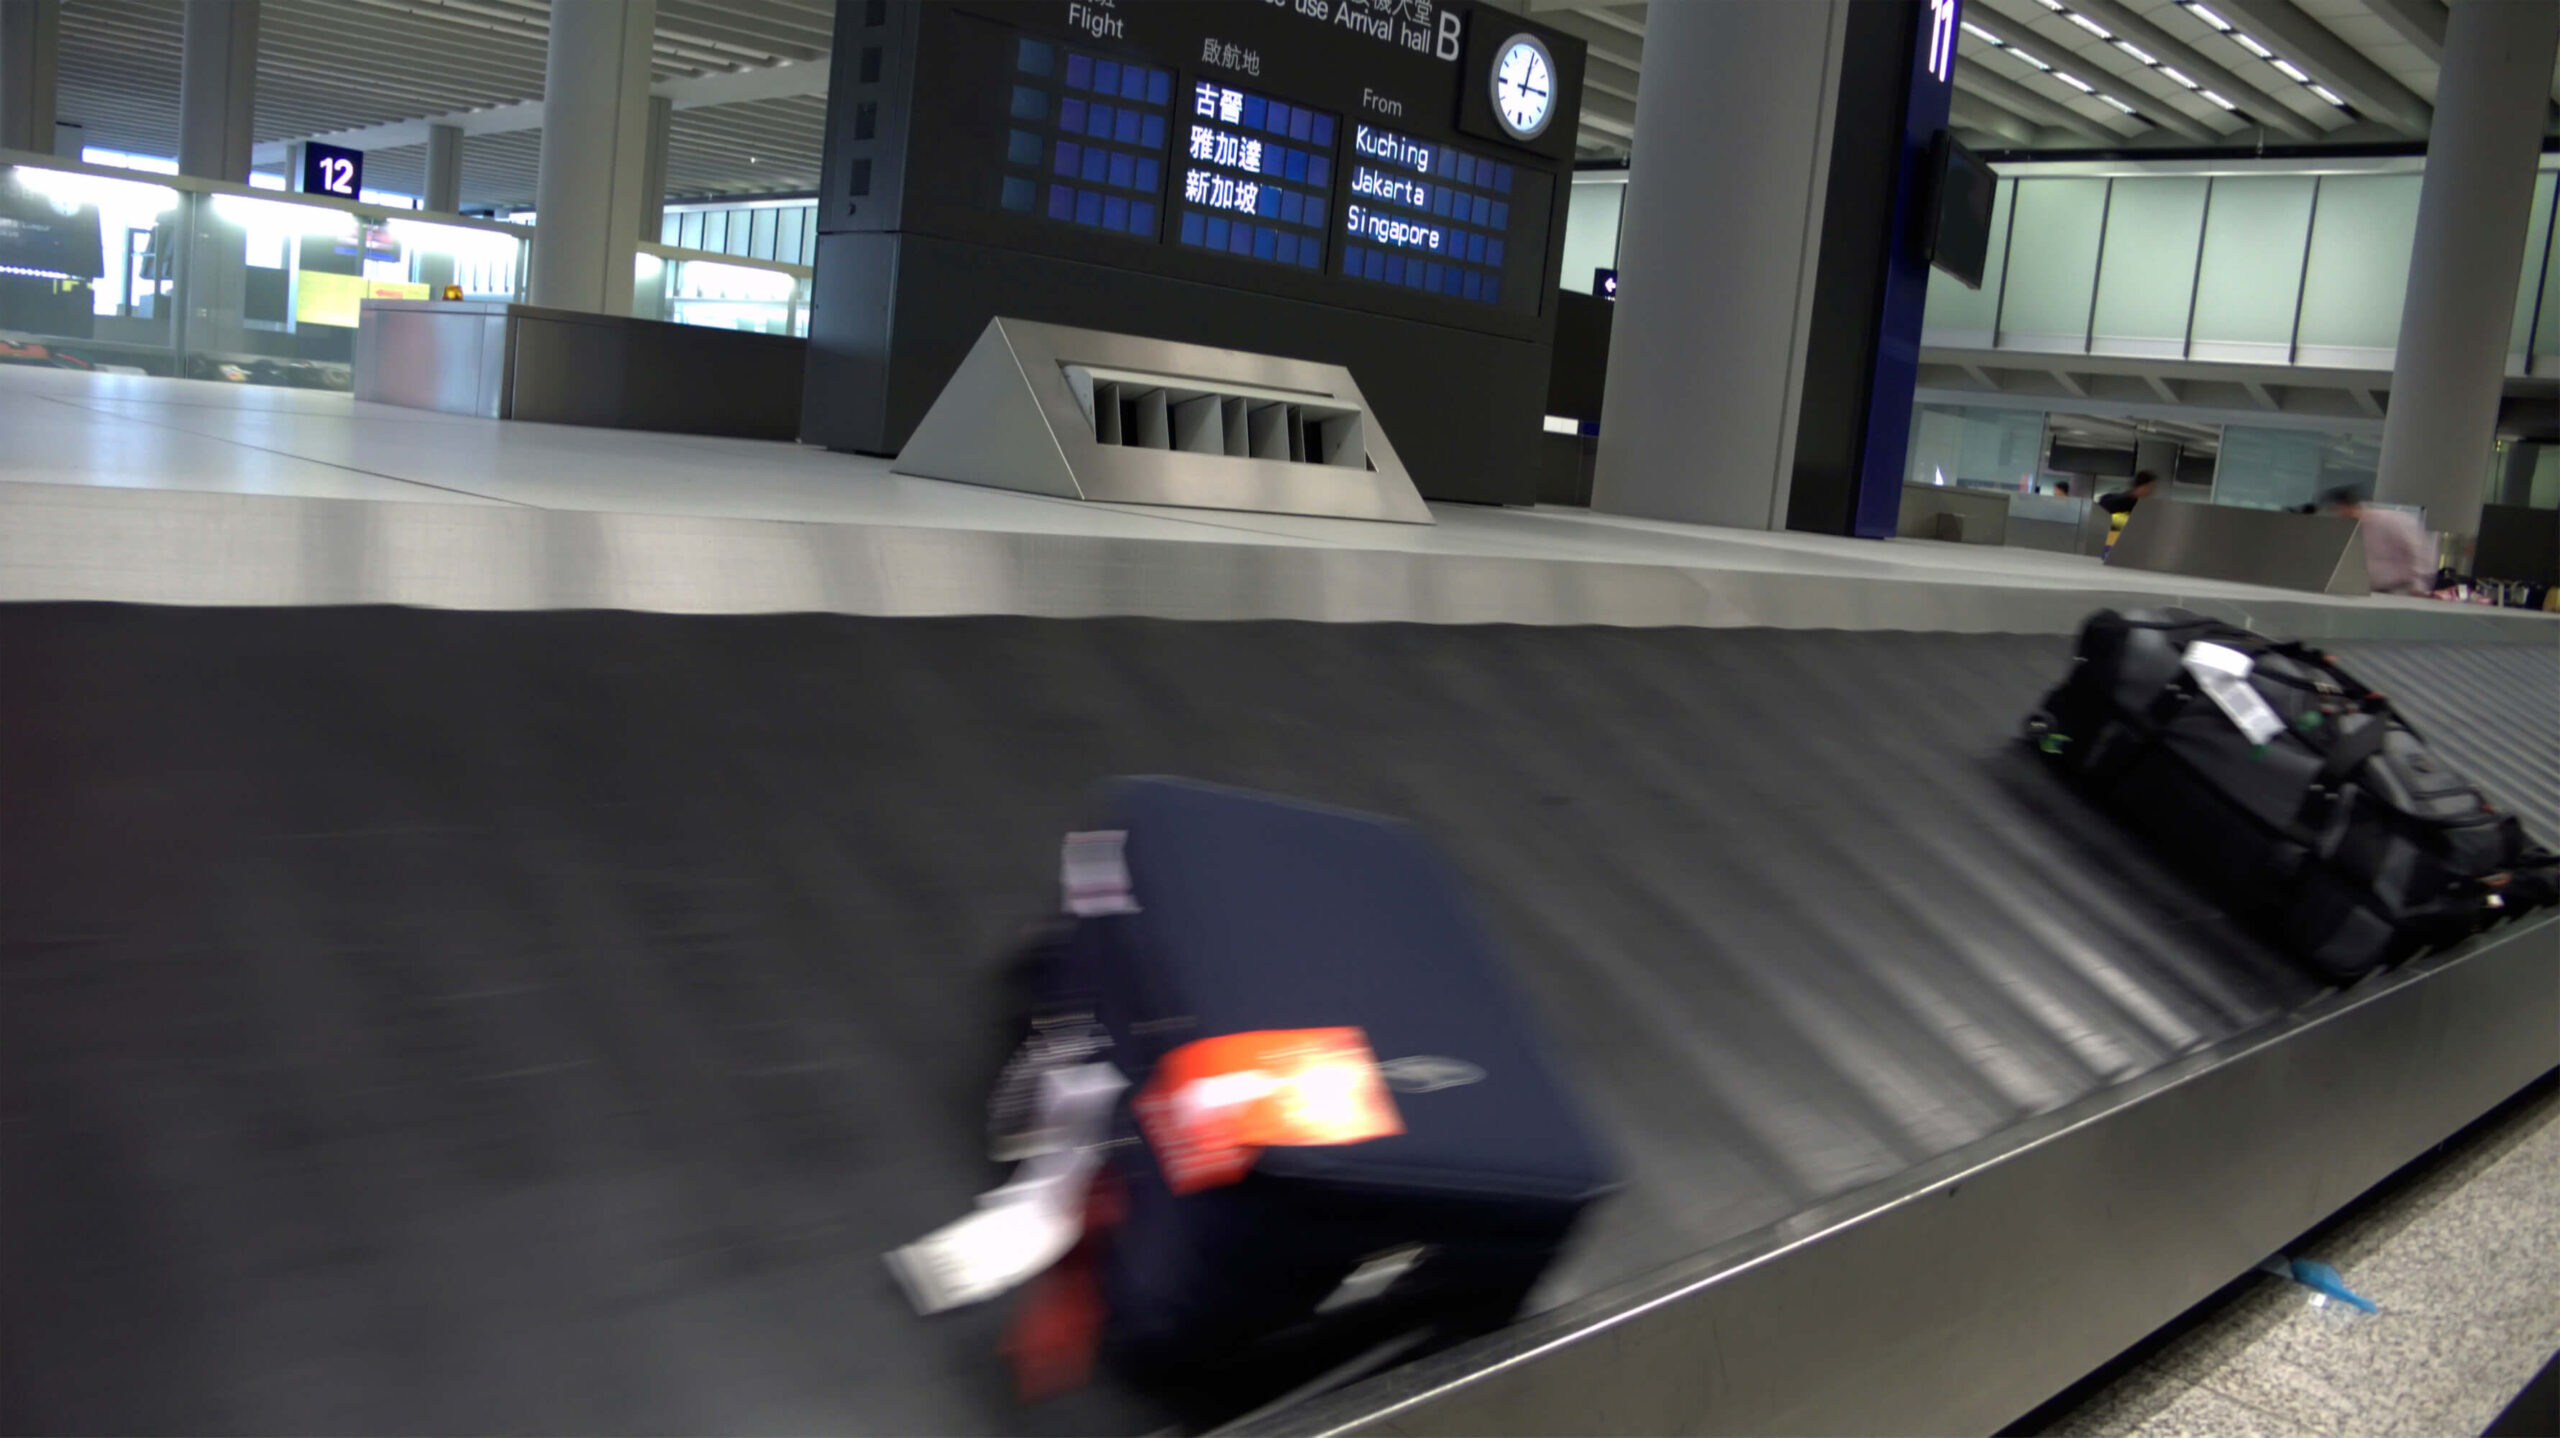 Air Transportation Commits to RFID Baggage Tracking Standards